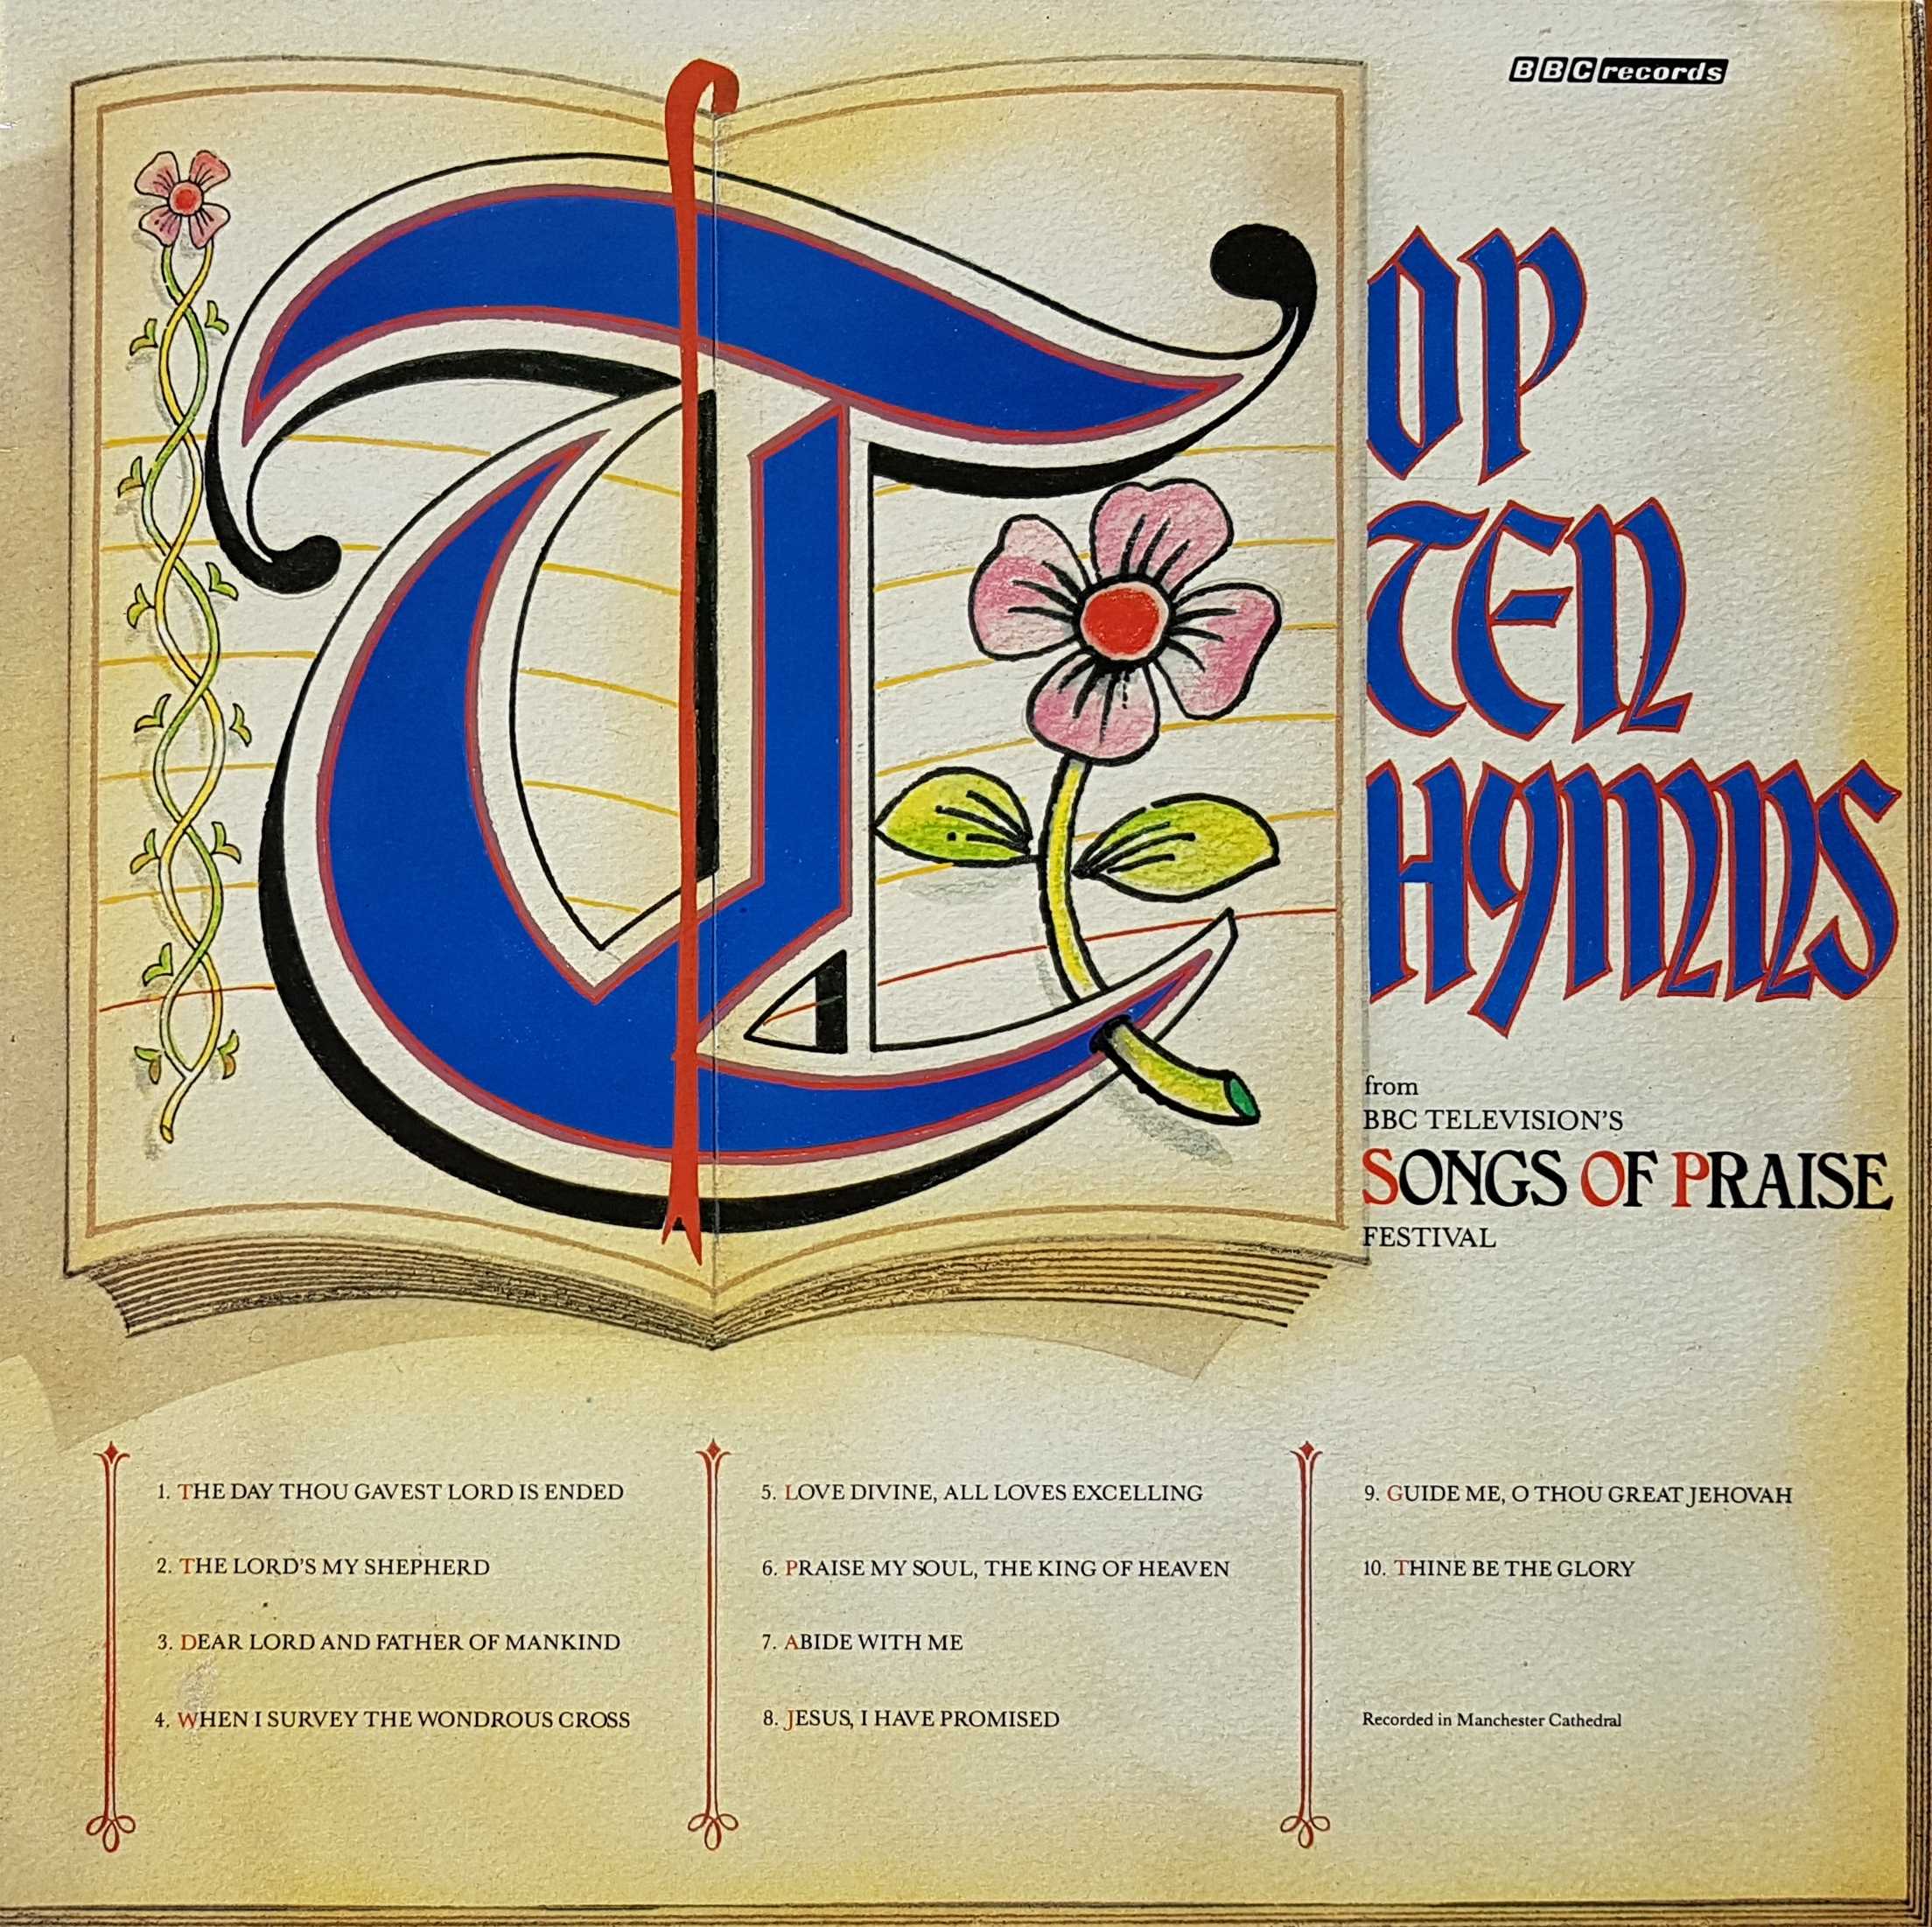 Picture of REC 556 Top ten hymns by artist Various from the BBC records and Tapes library